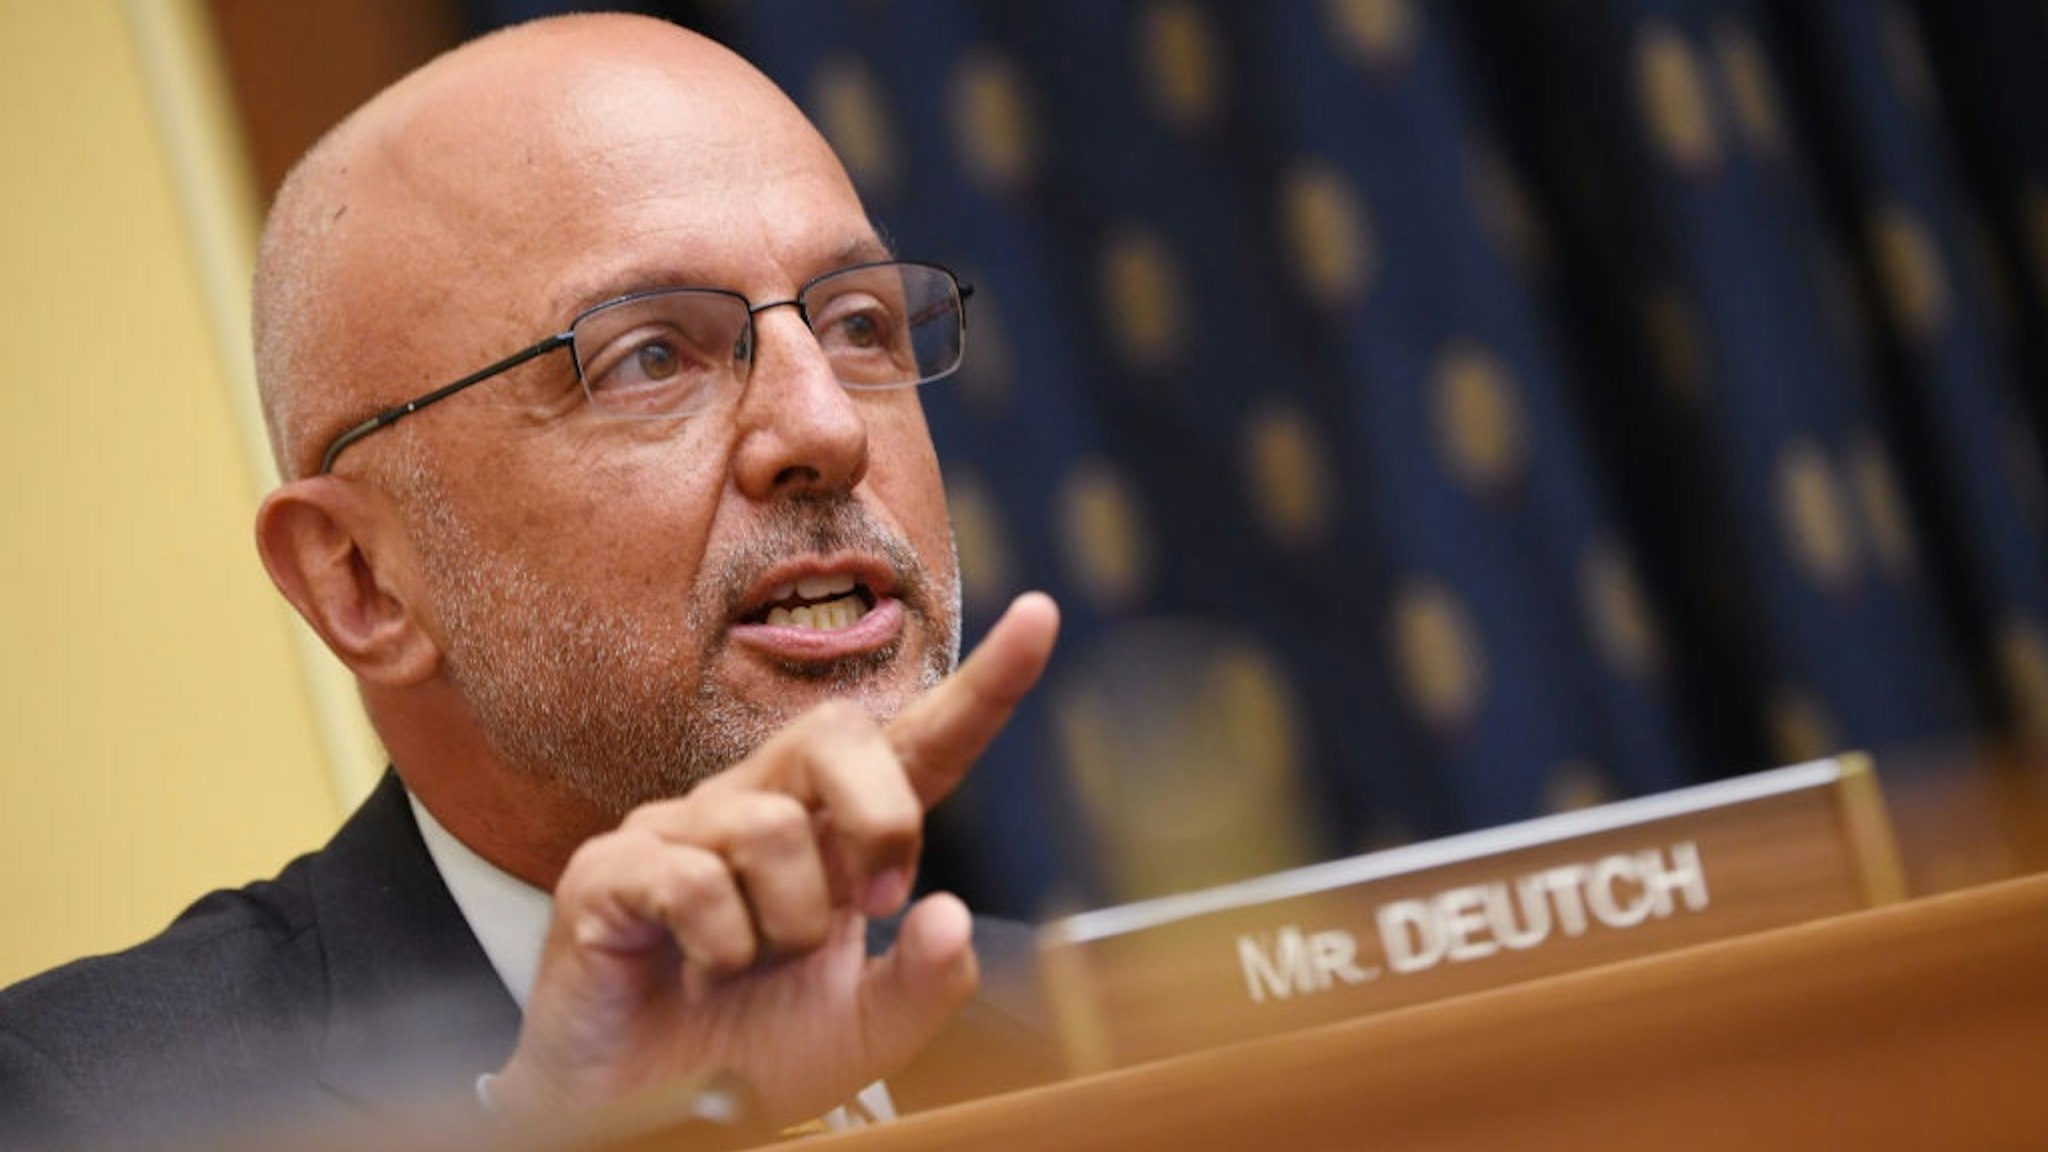 Representative Ted Deutch, a Democrat from Florida, speaks during a House Foreign Affairs Committee hearing in Washington, D.C., U.S., on Wednesday, Sept. 16, 2020.